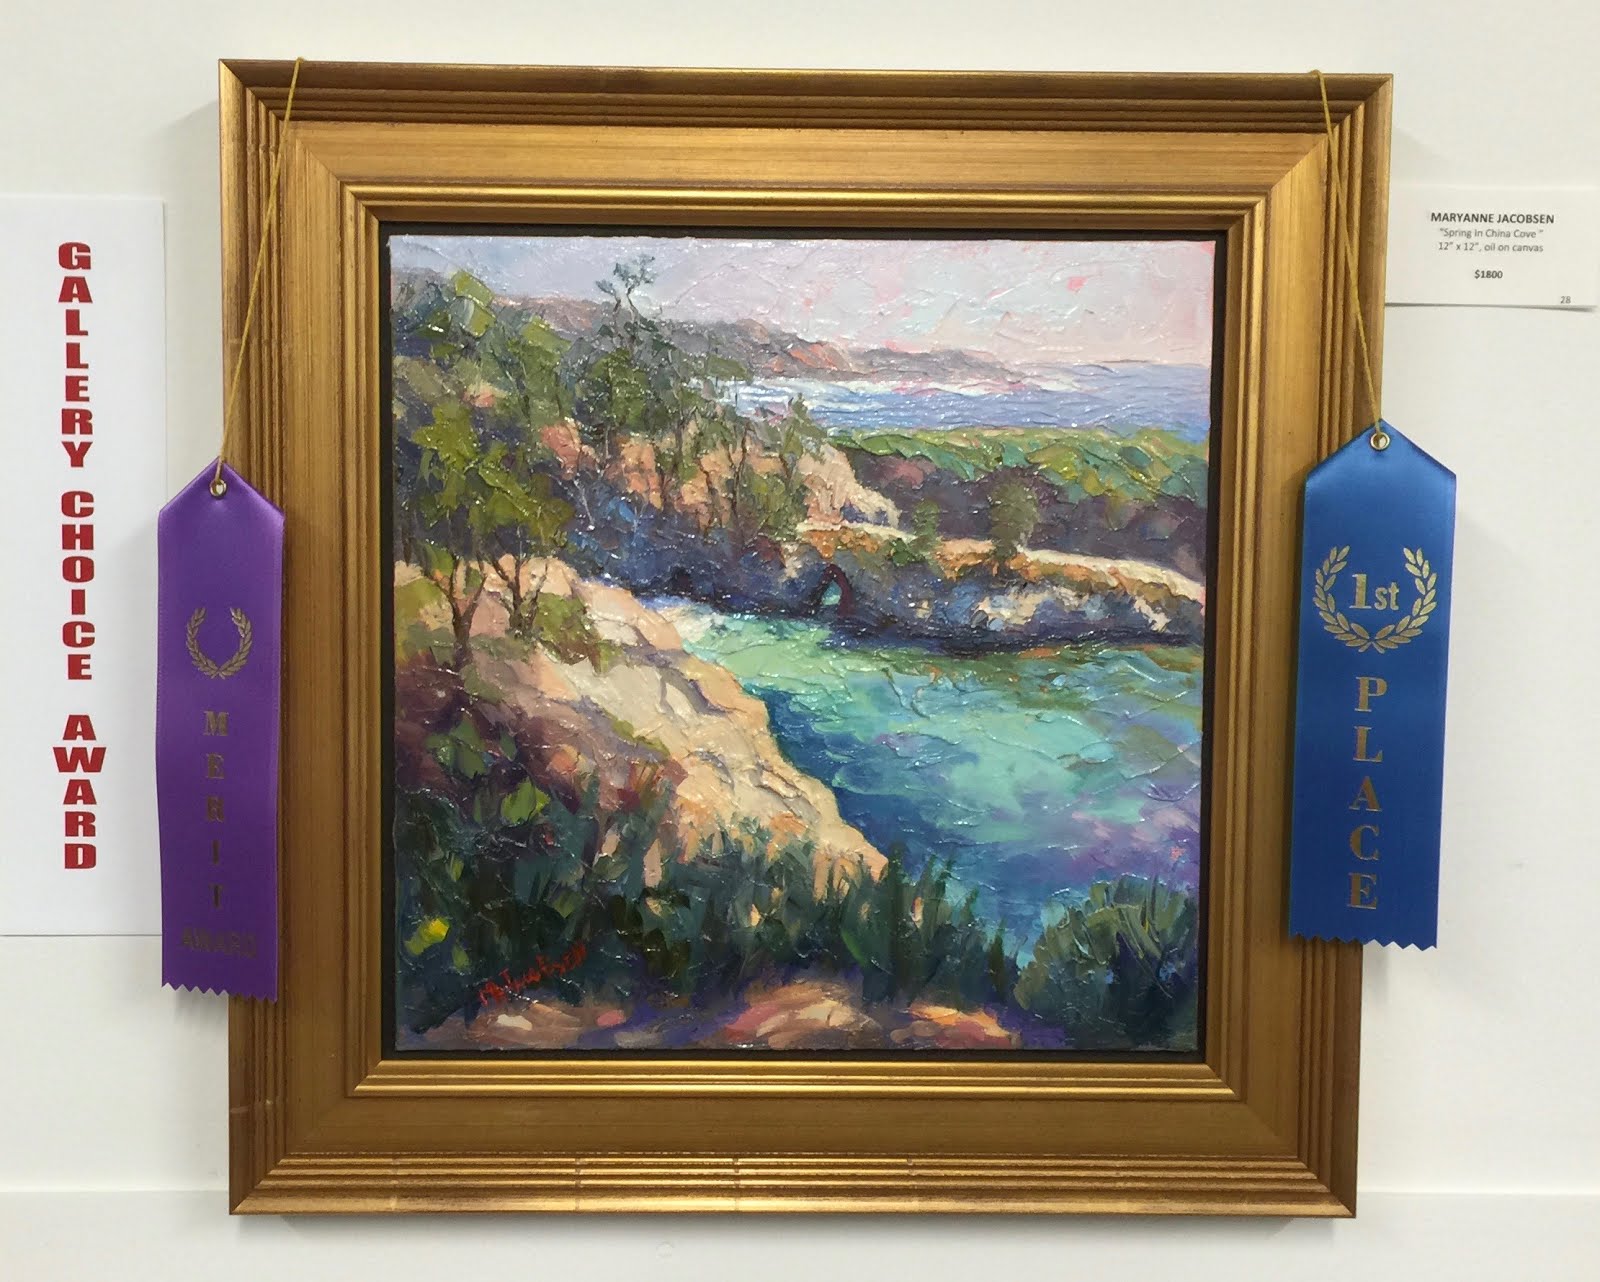 First Place and Gallery Choice Award!